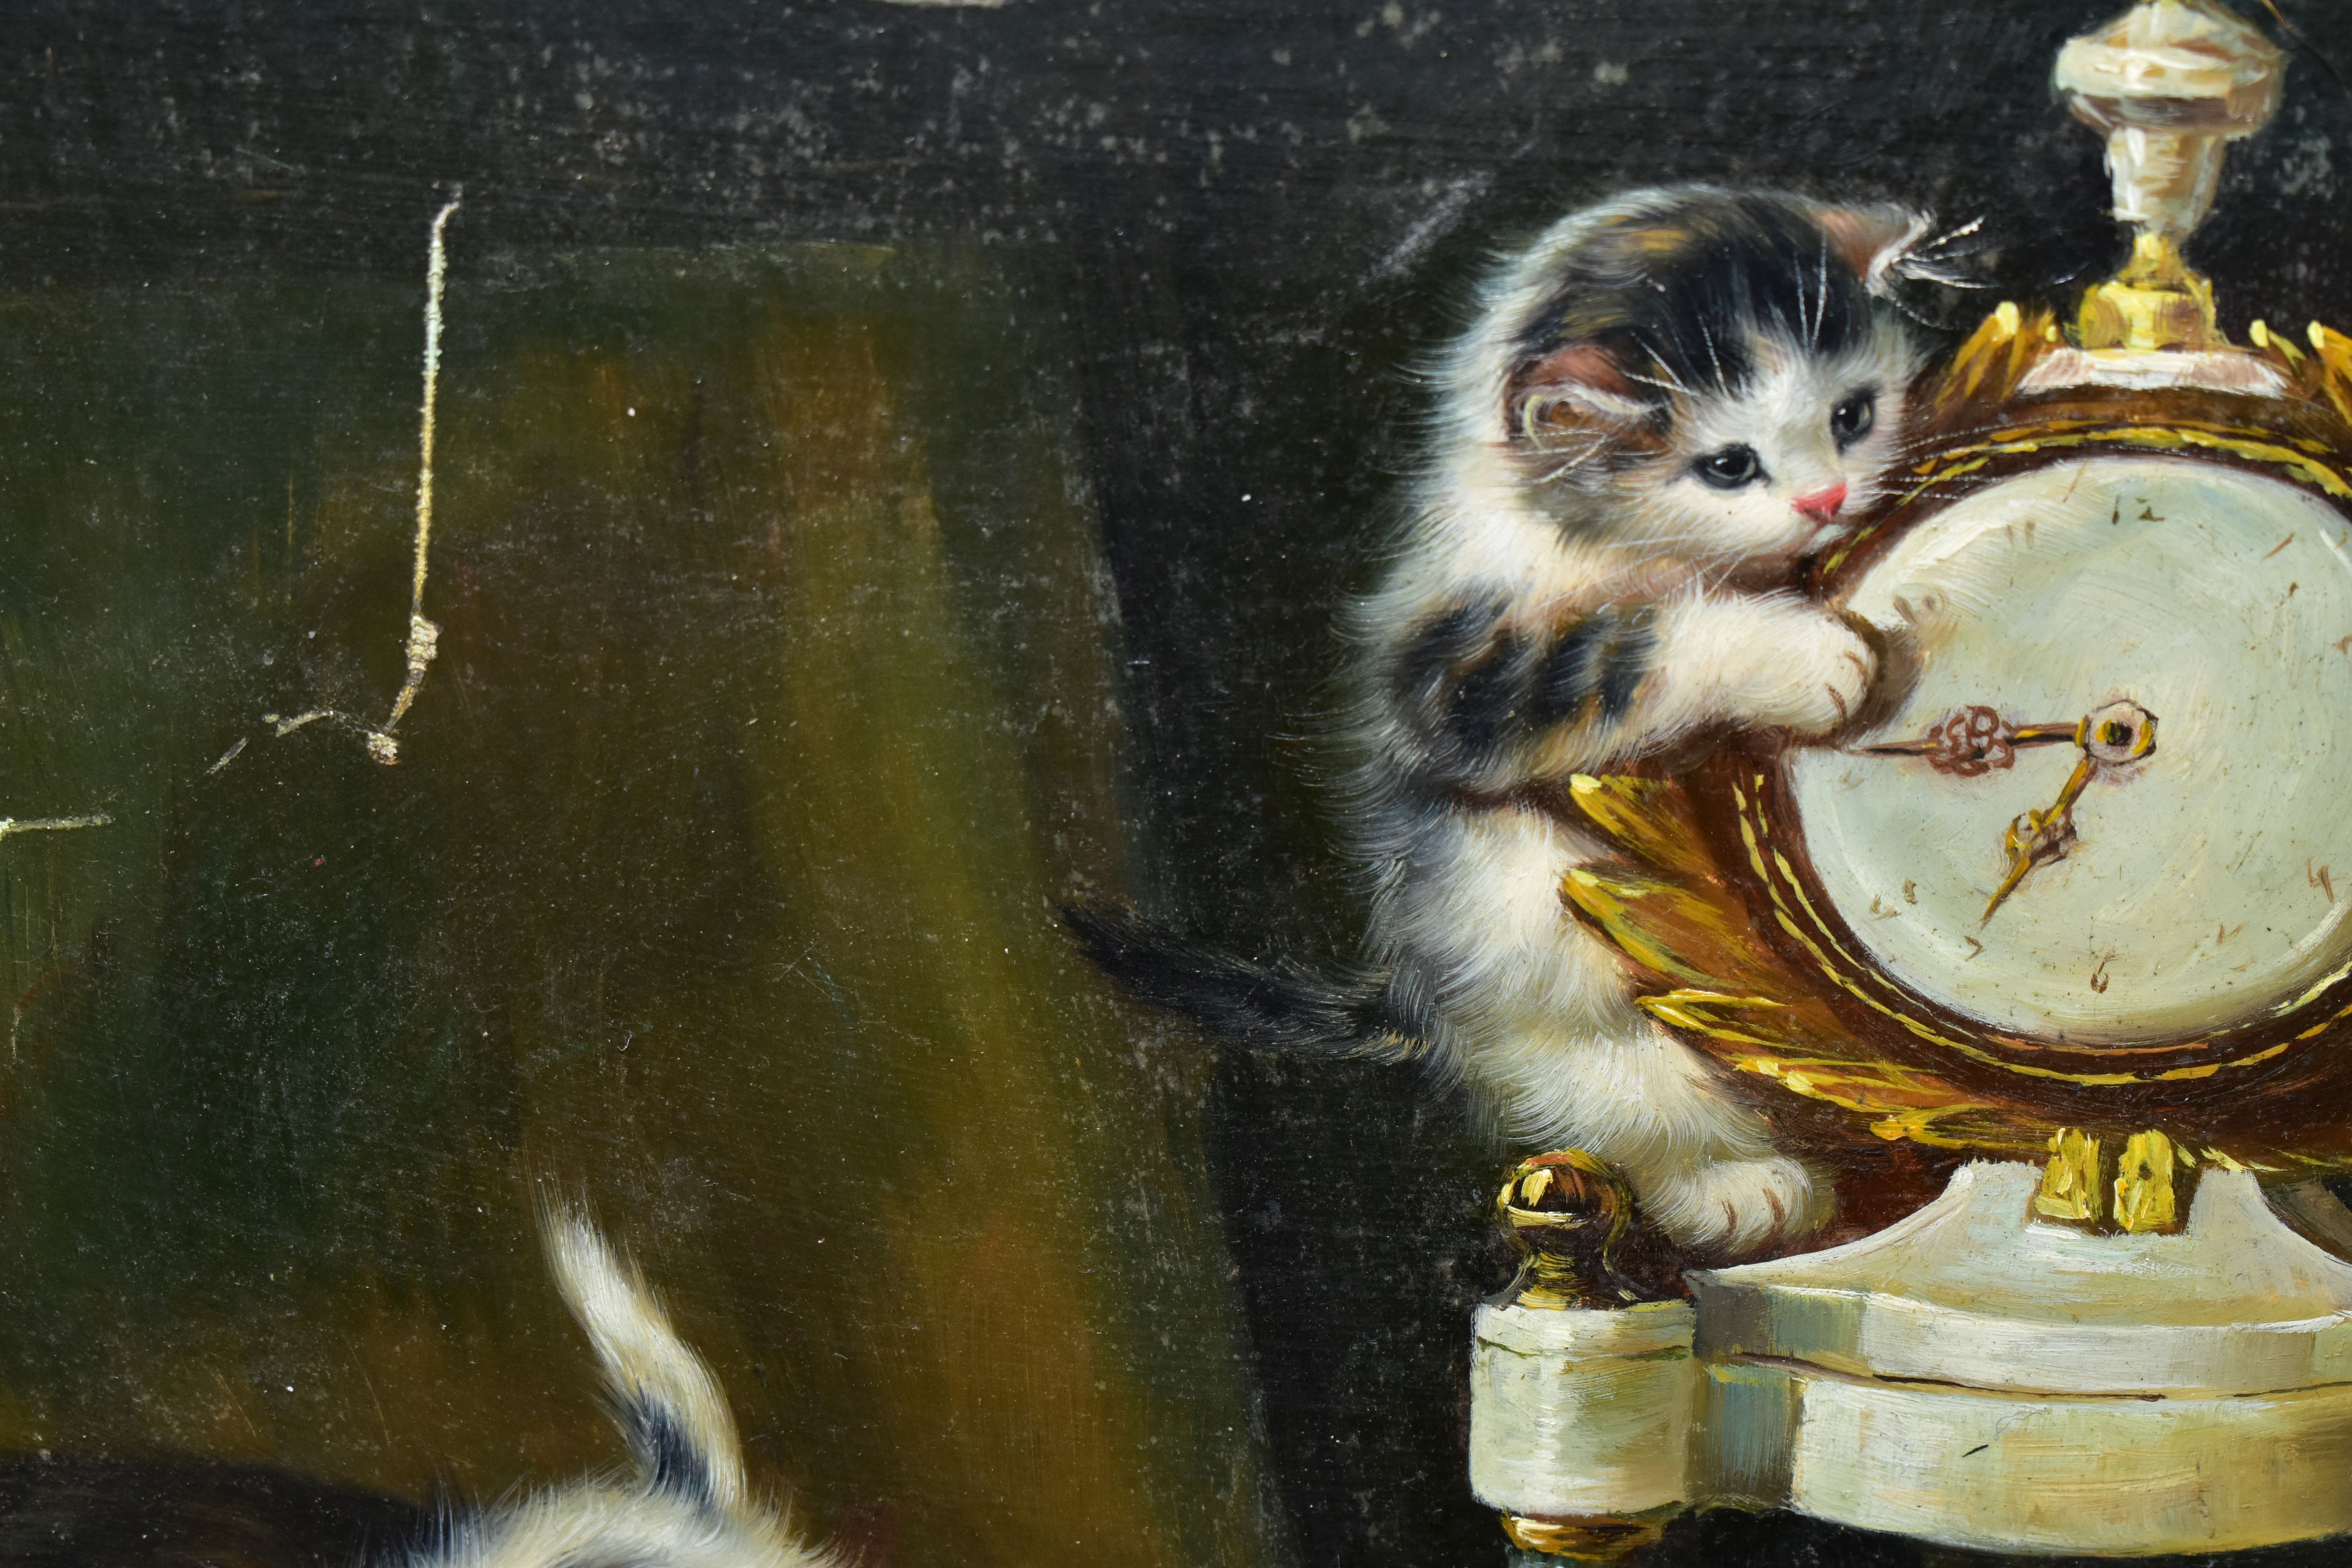 R. FLINT (20TH CENTURY) 'A CAT WITH KITTENS AT PLAY', signed bottom left, oil on wooden panel, - Image 4 of 4